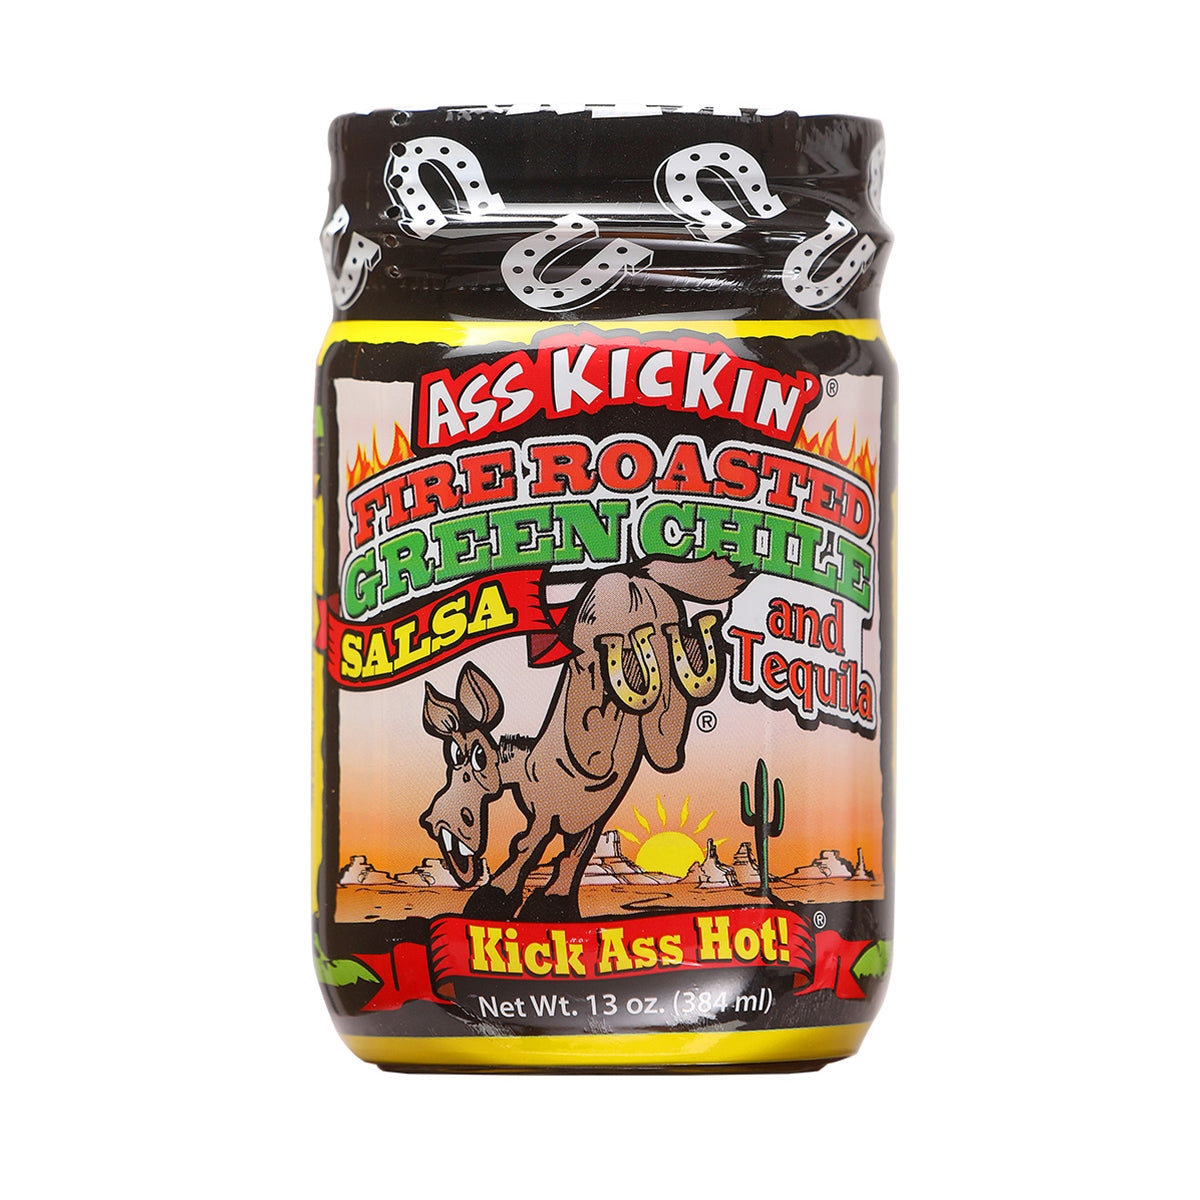 Salsa Ass Kickin Roasted Green Chile and Tequila 13 oz $7.98